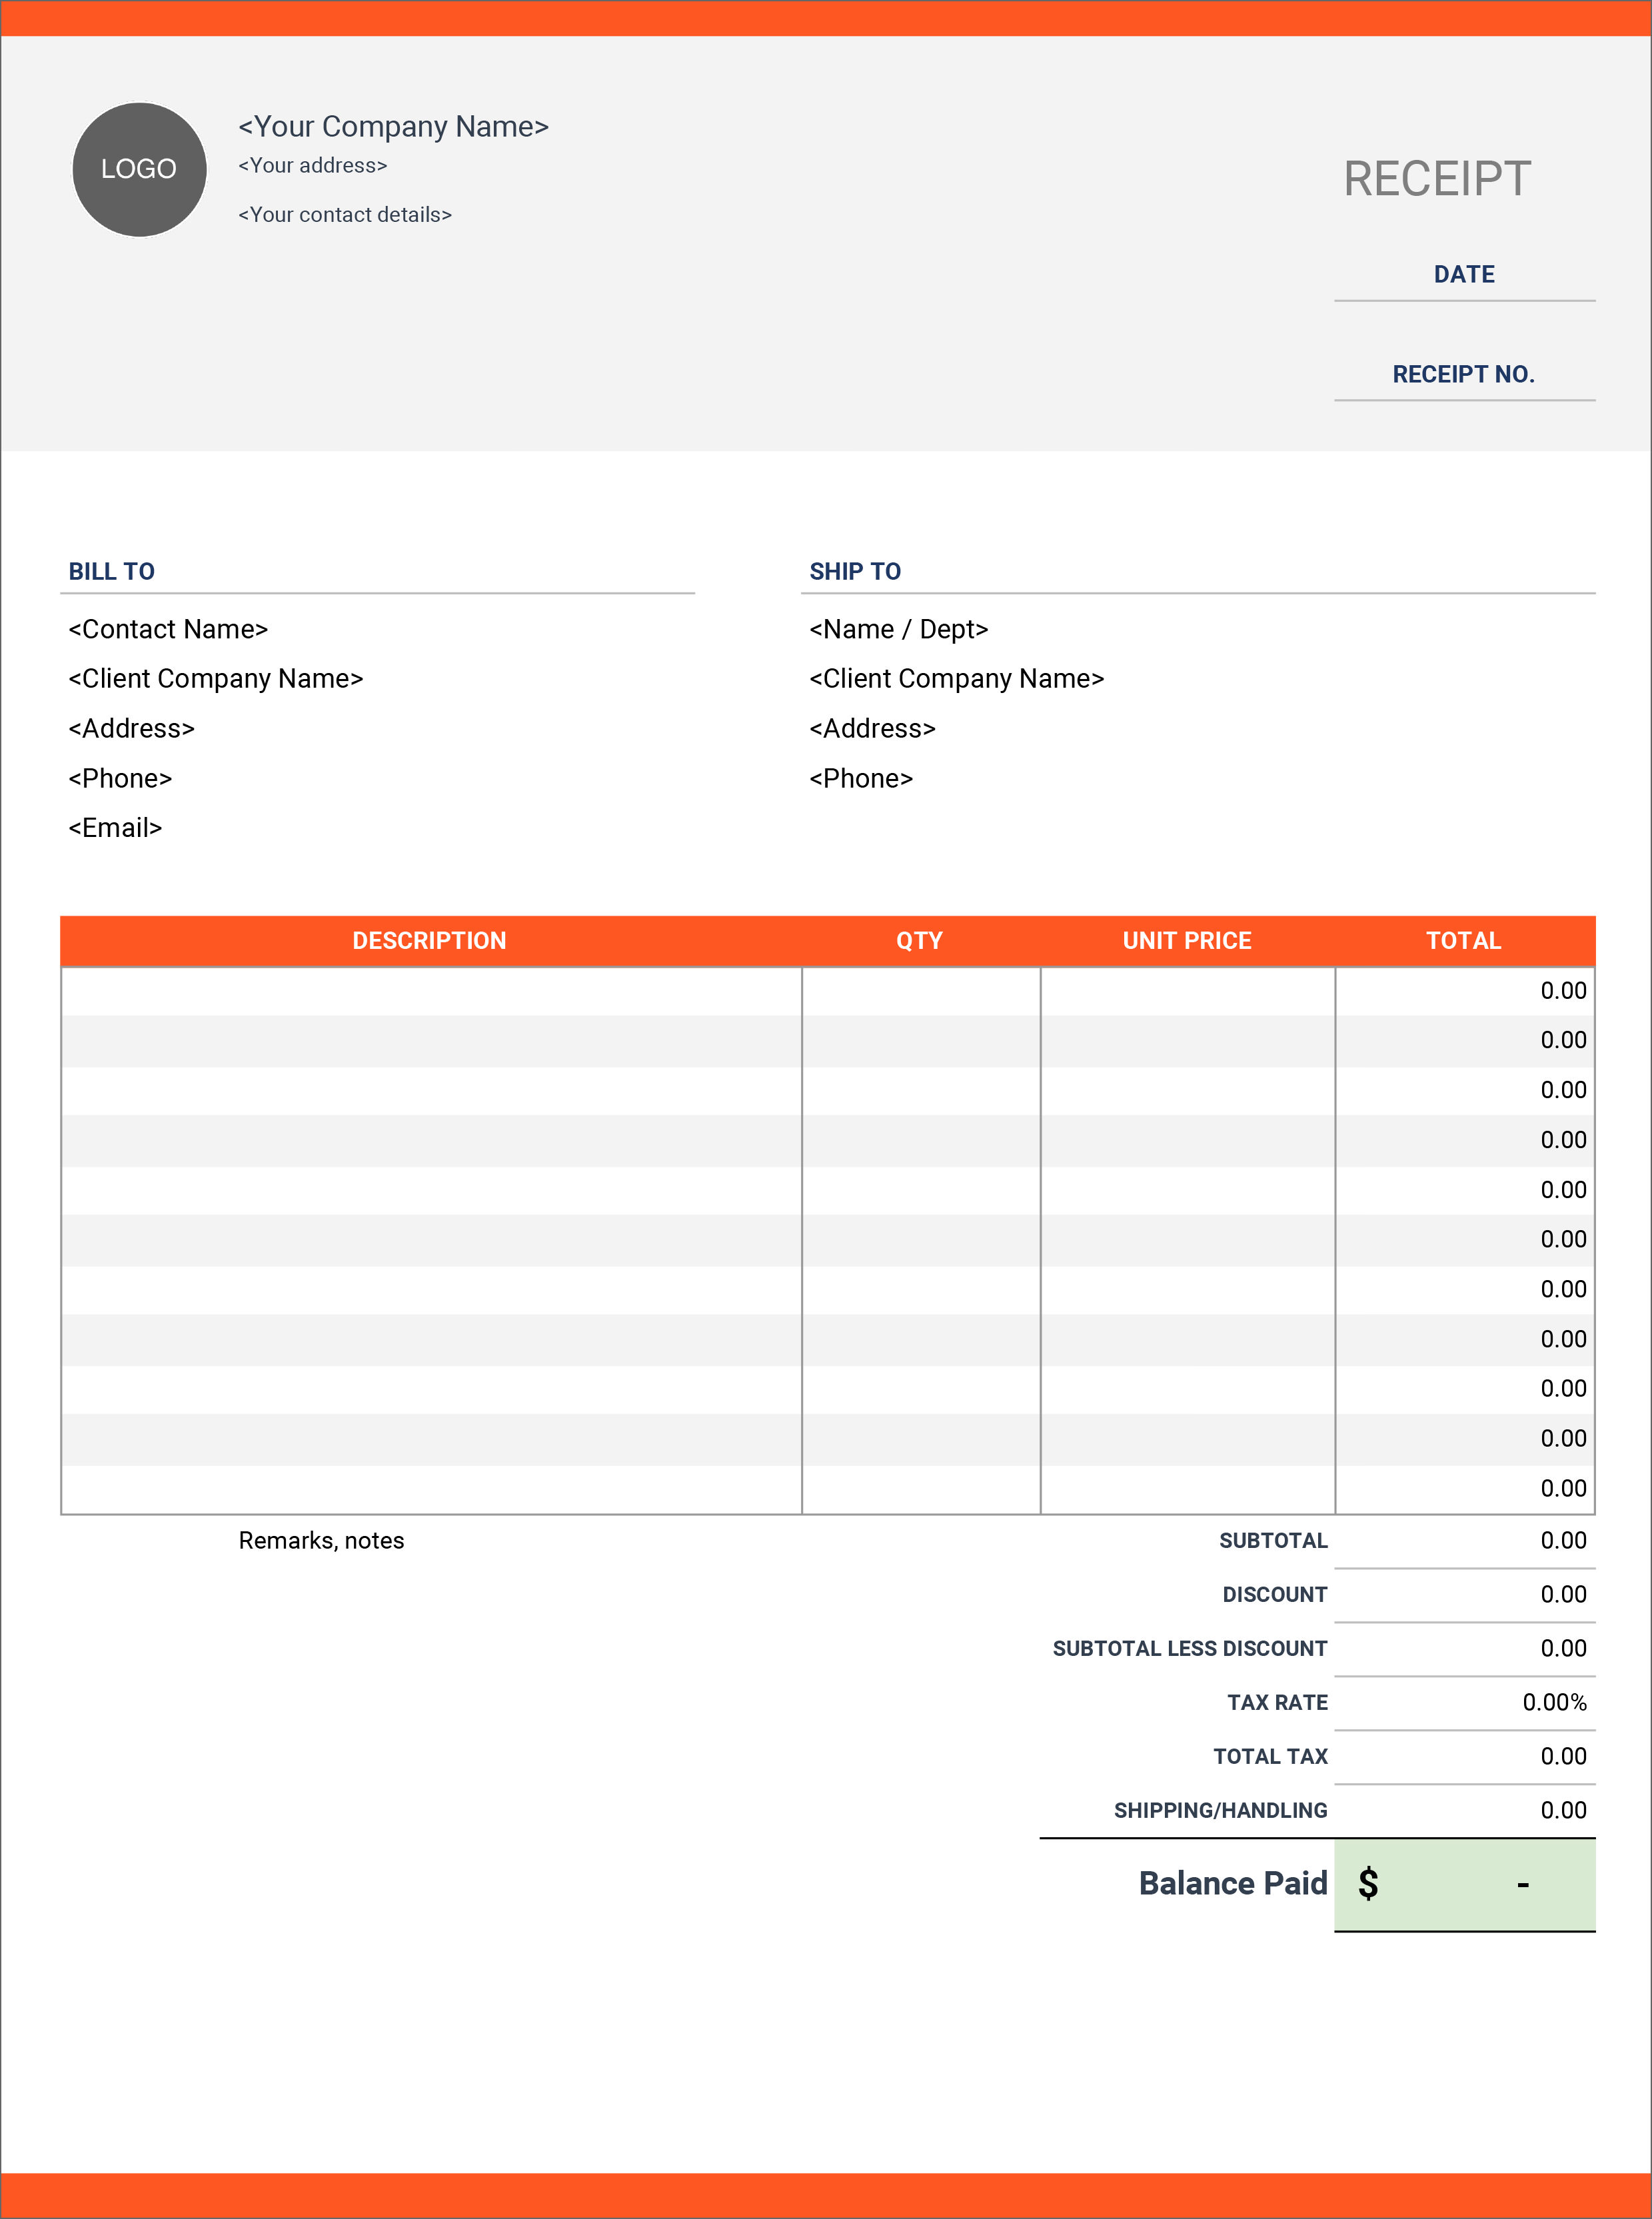 receipt-invoice-template-invoice-example-16-free-receipt-templates-download-for-microsoft-word